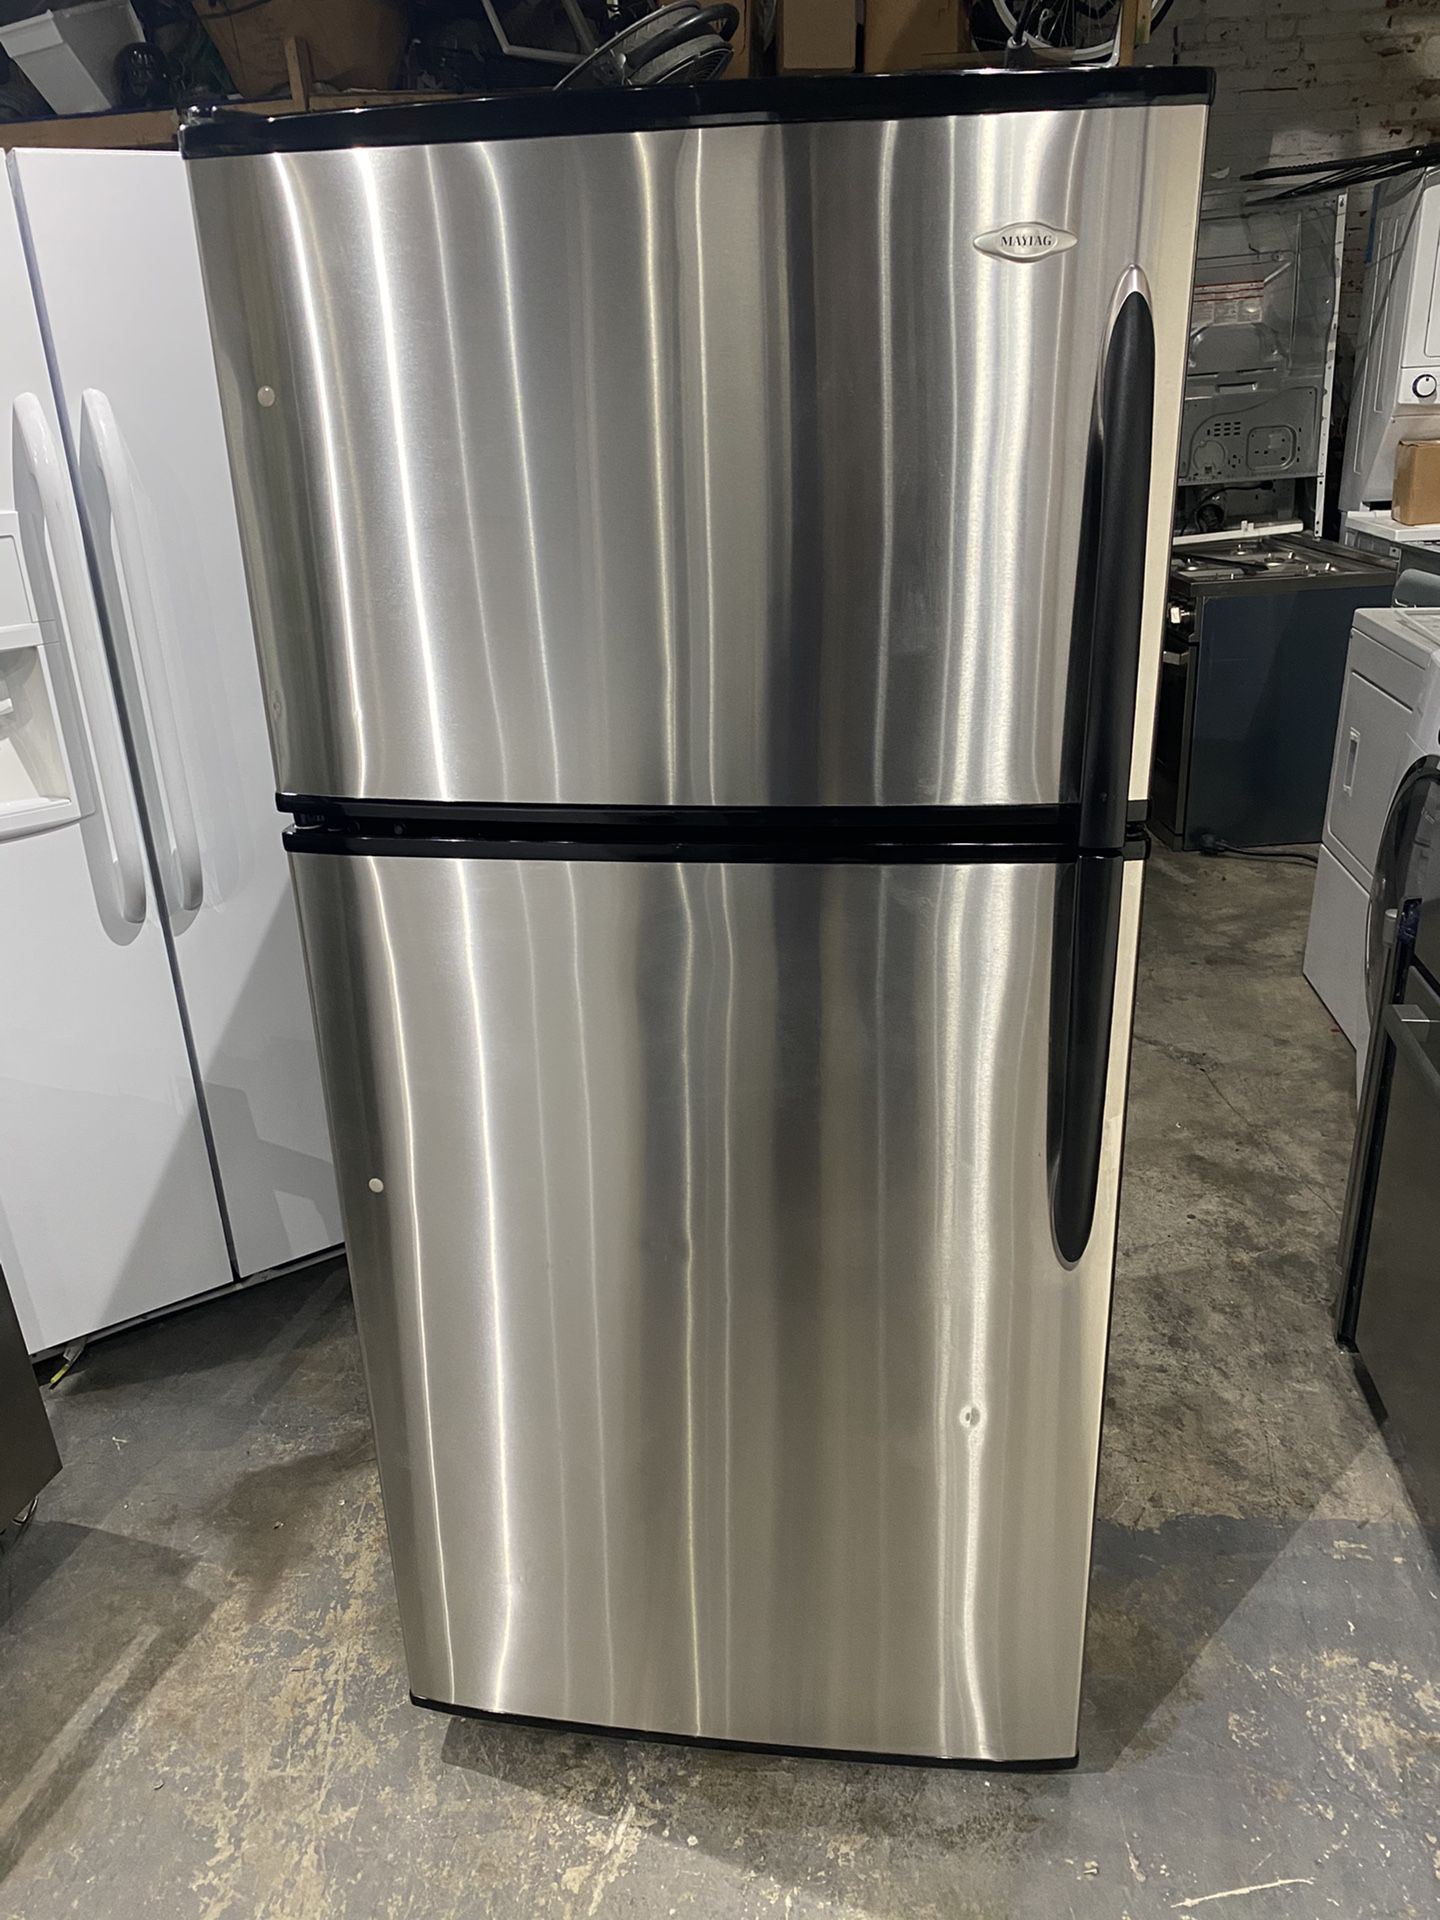 Maytag refrigerator 30 x 66 stainless steel works perfect clean one receipt for 30 days warranty